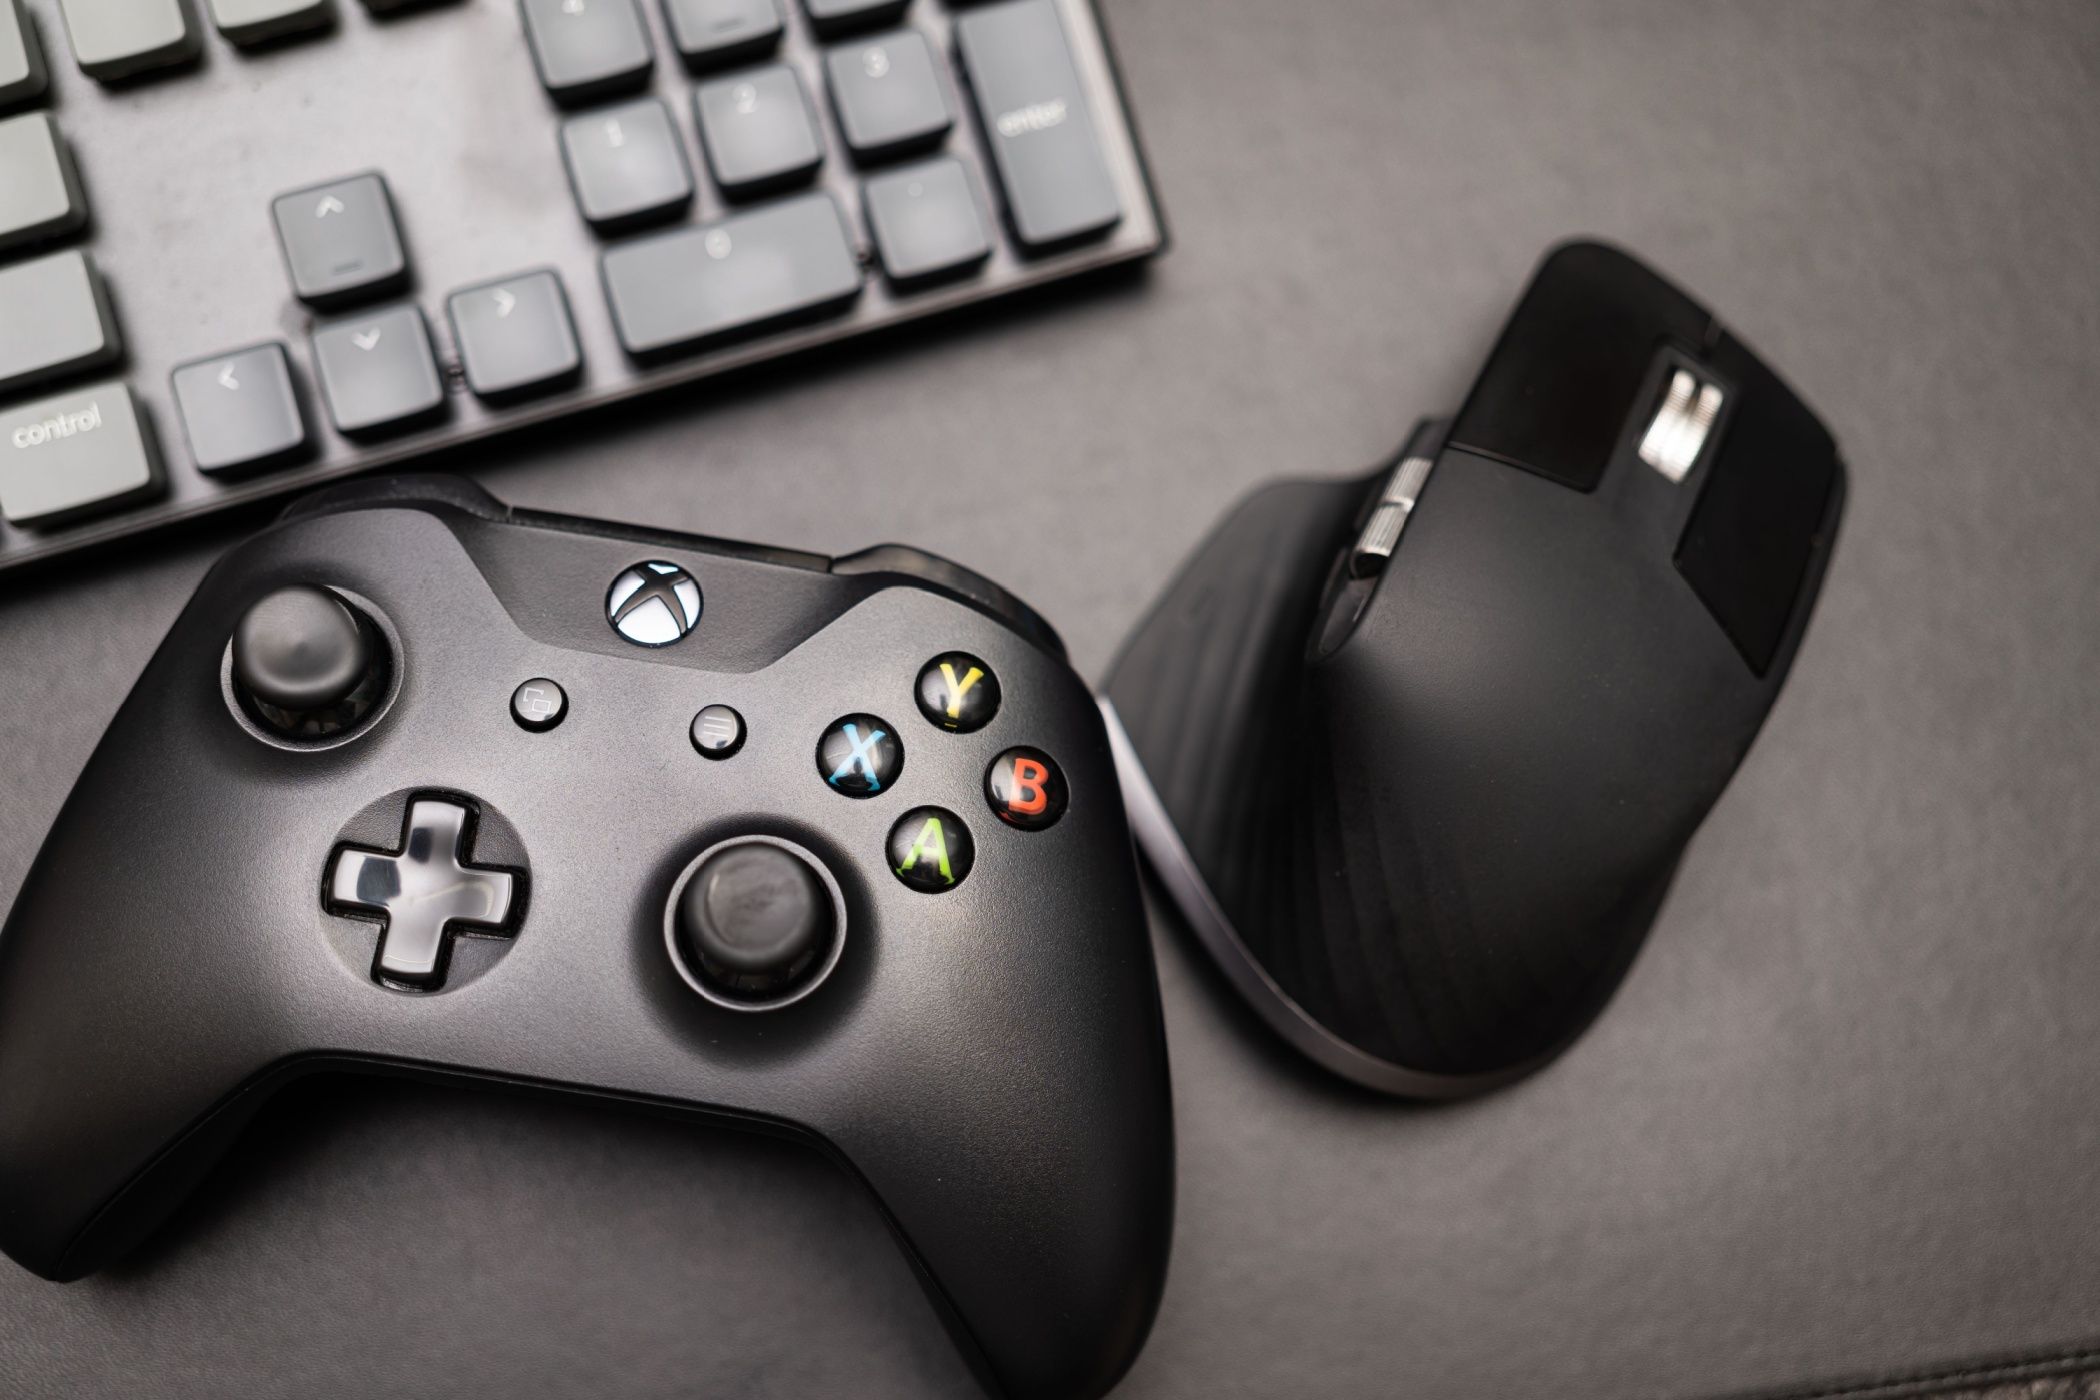 Wireless gamepad for the Xbox One on desk with keyboard. Black Xbox game controller.